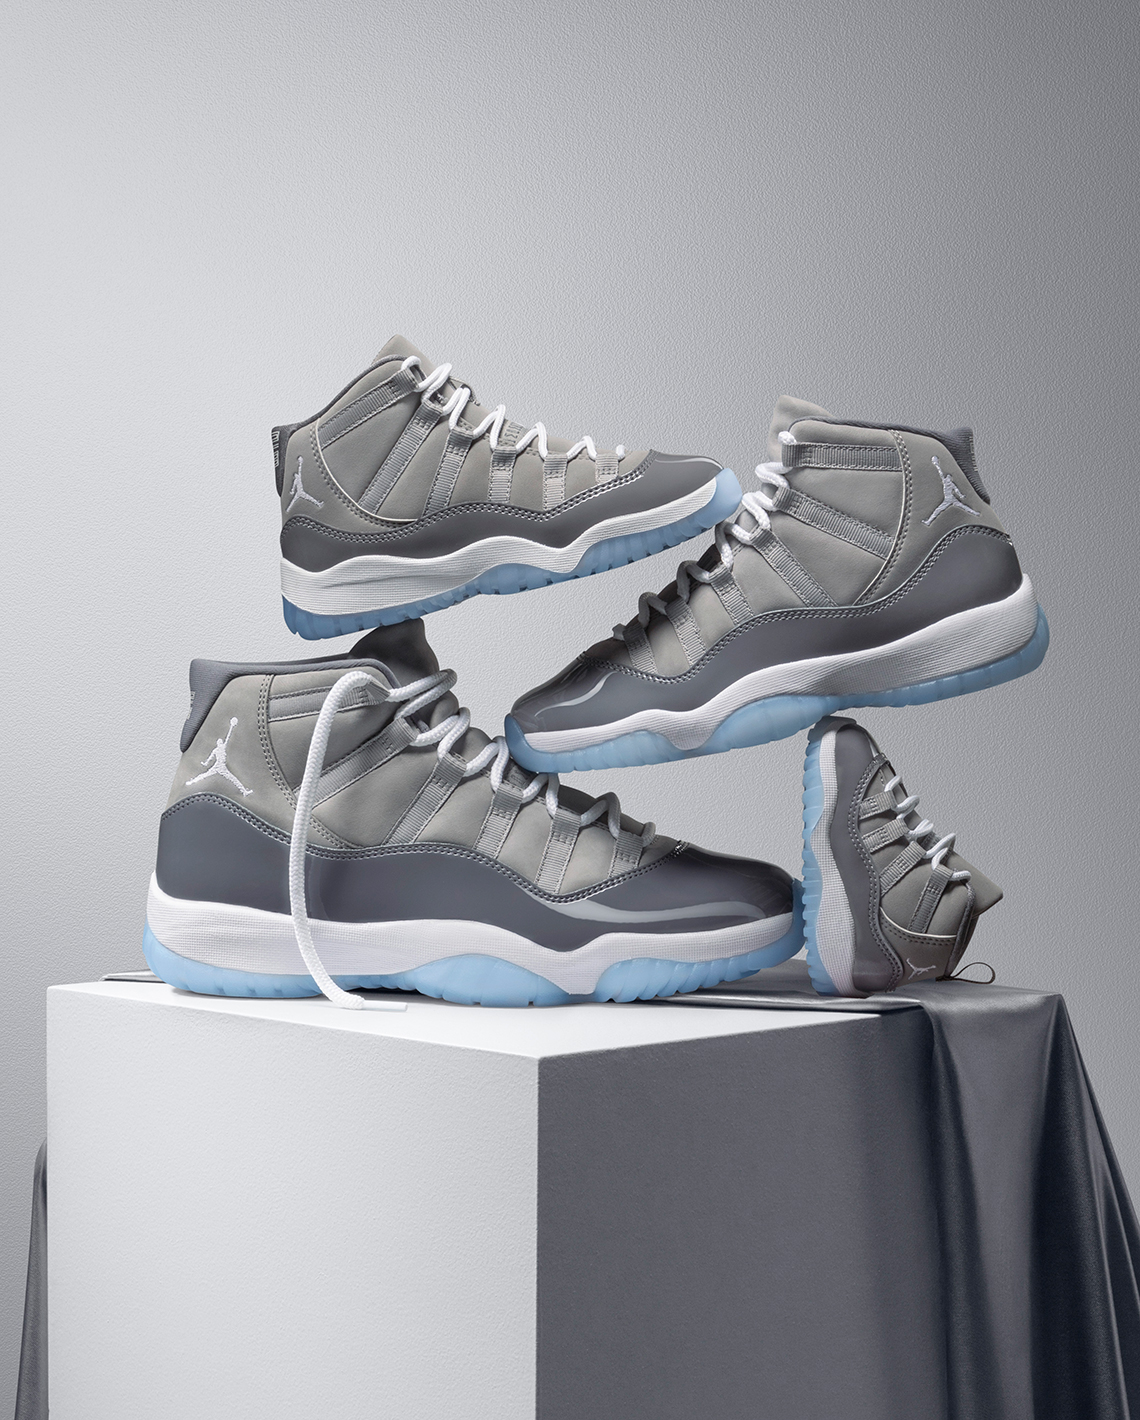 Air Jordan 11 'Cool Grey' CT8012005 Release Date there are more brands